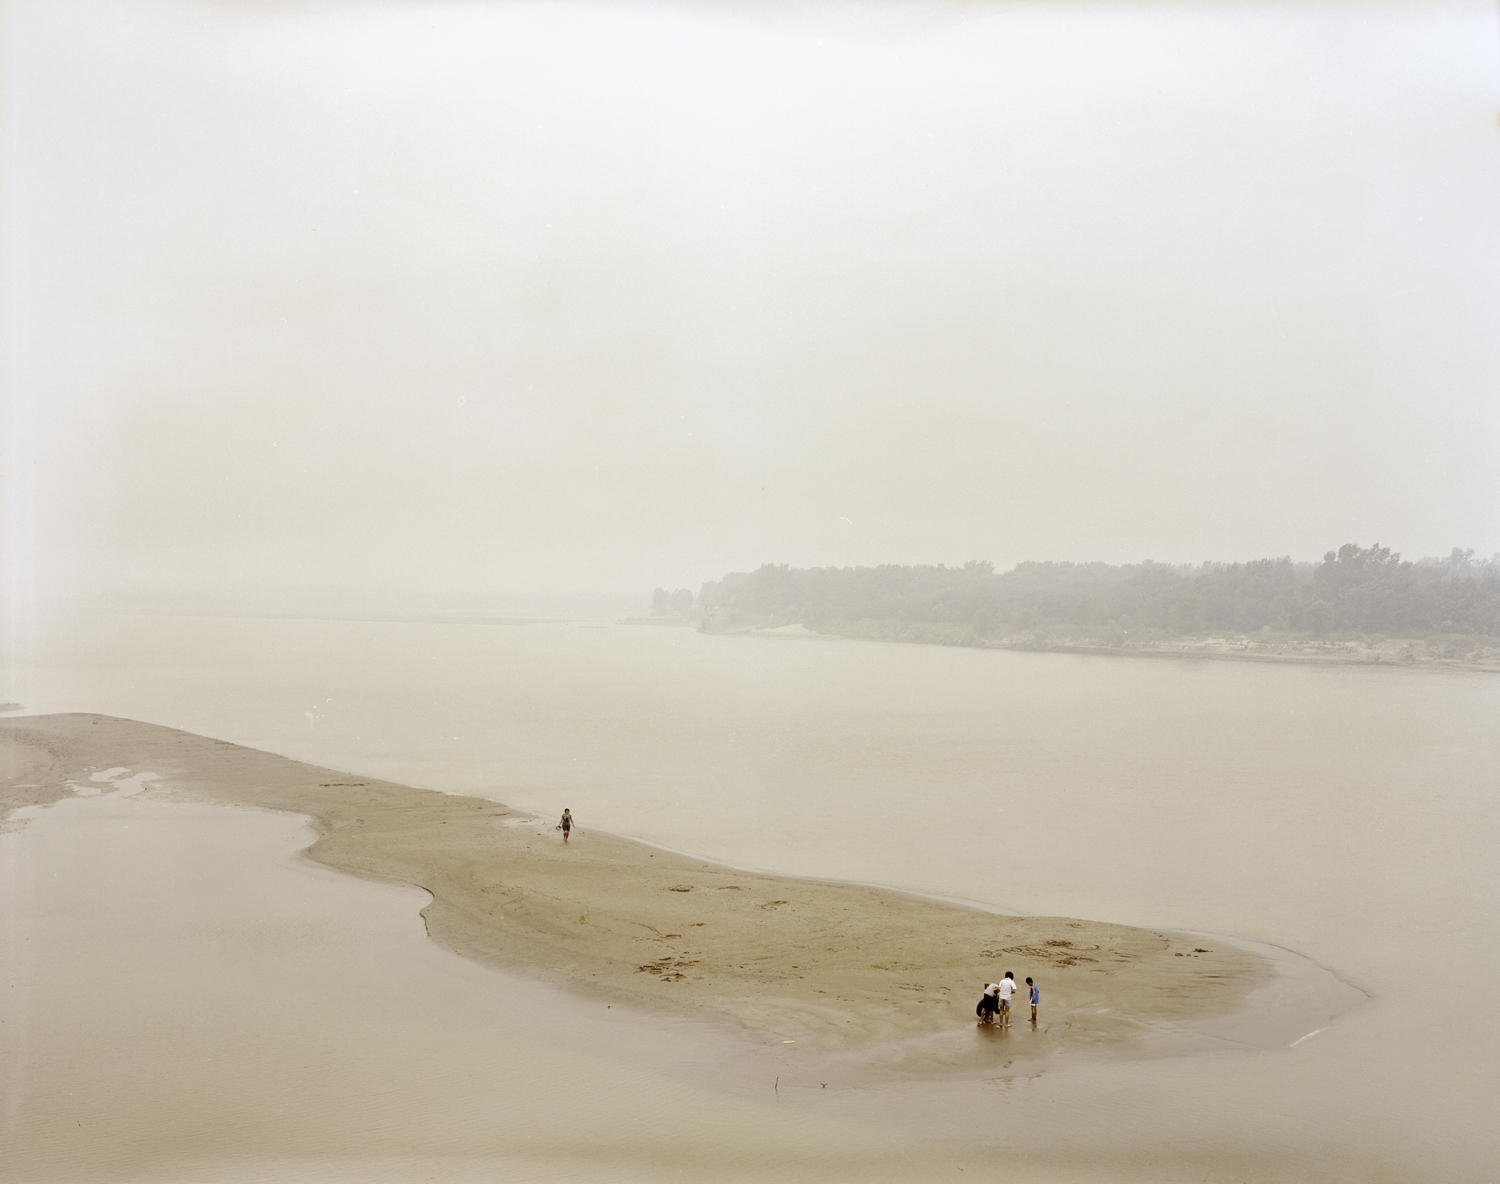 image: People playing in the riverbed, Shandong province.